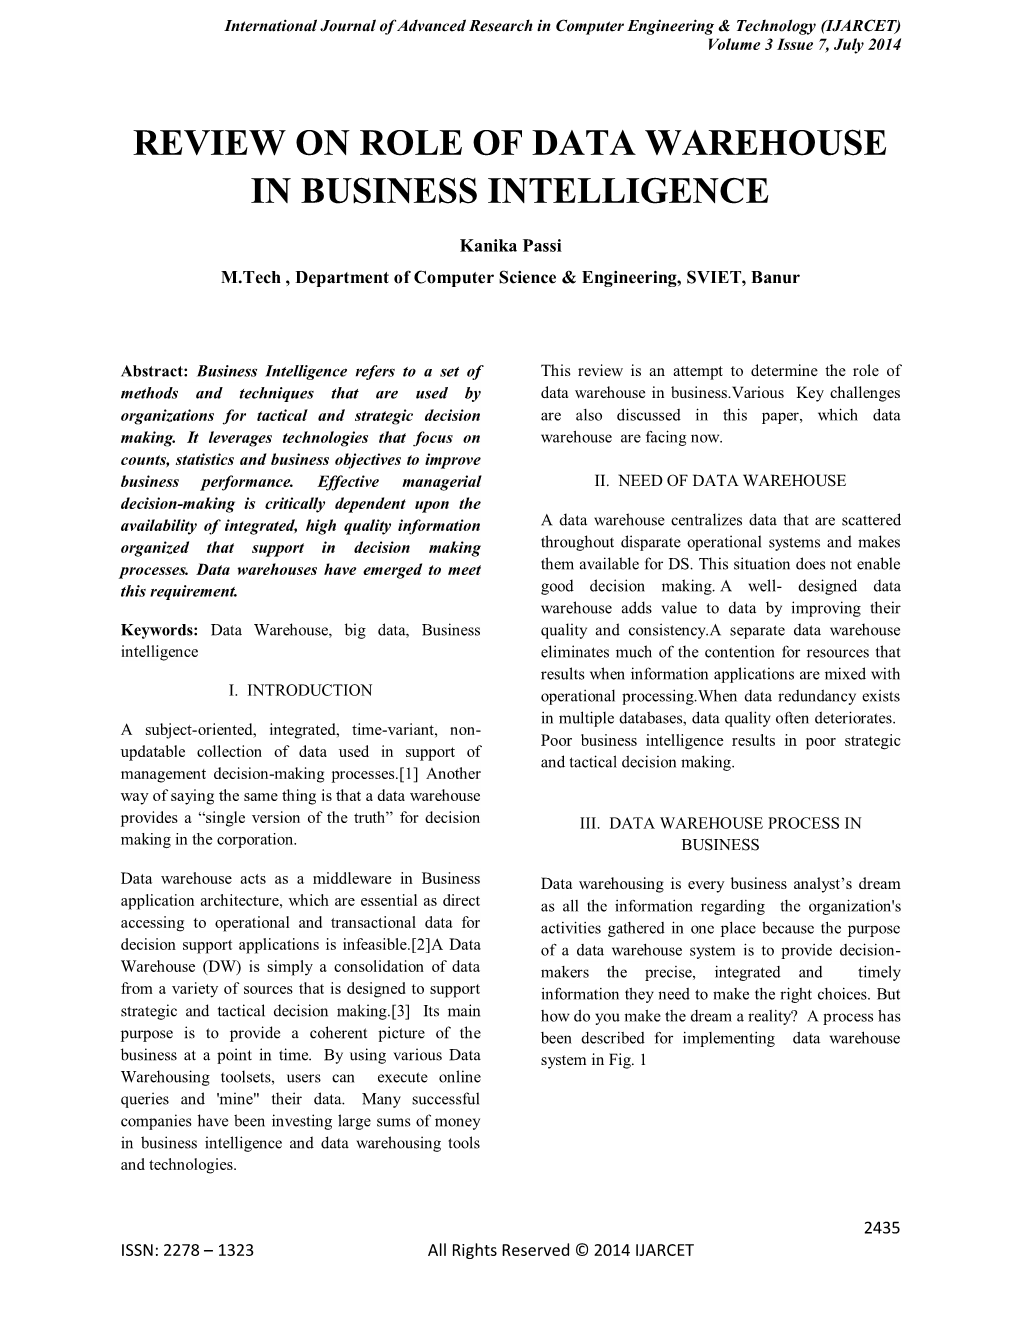 Review on Role of Data Warehouse in Business Intelligence